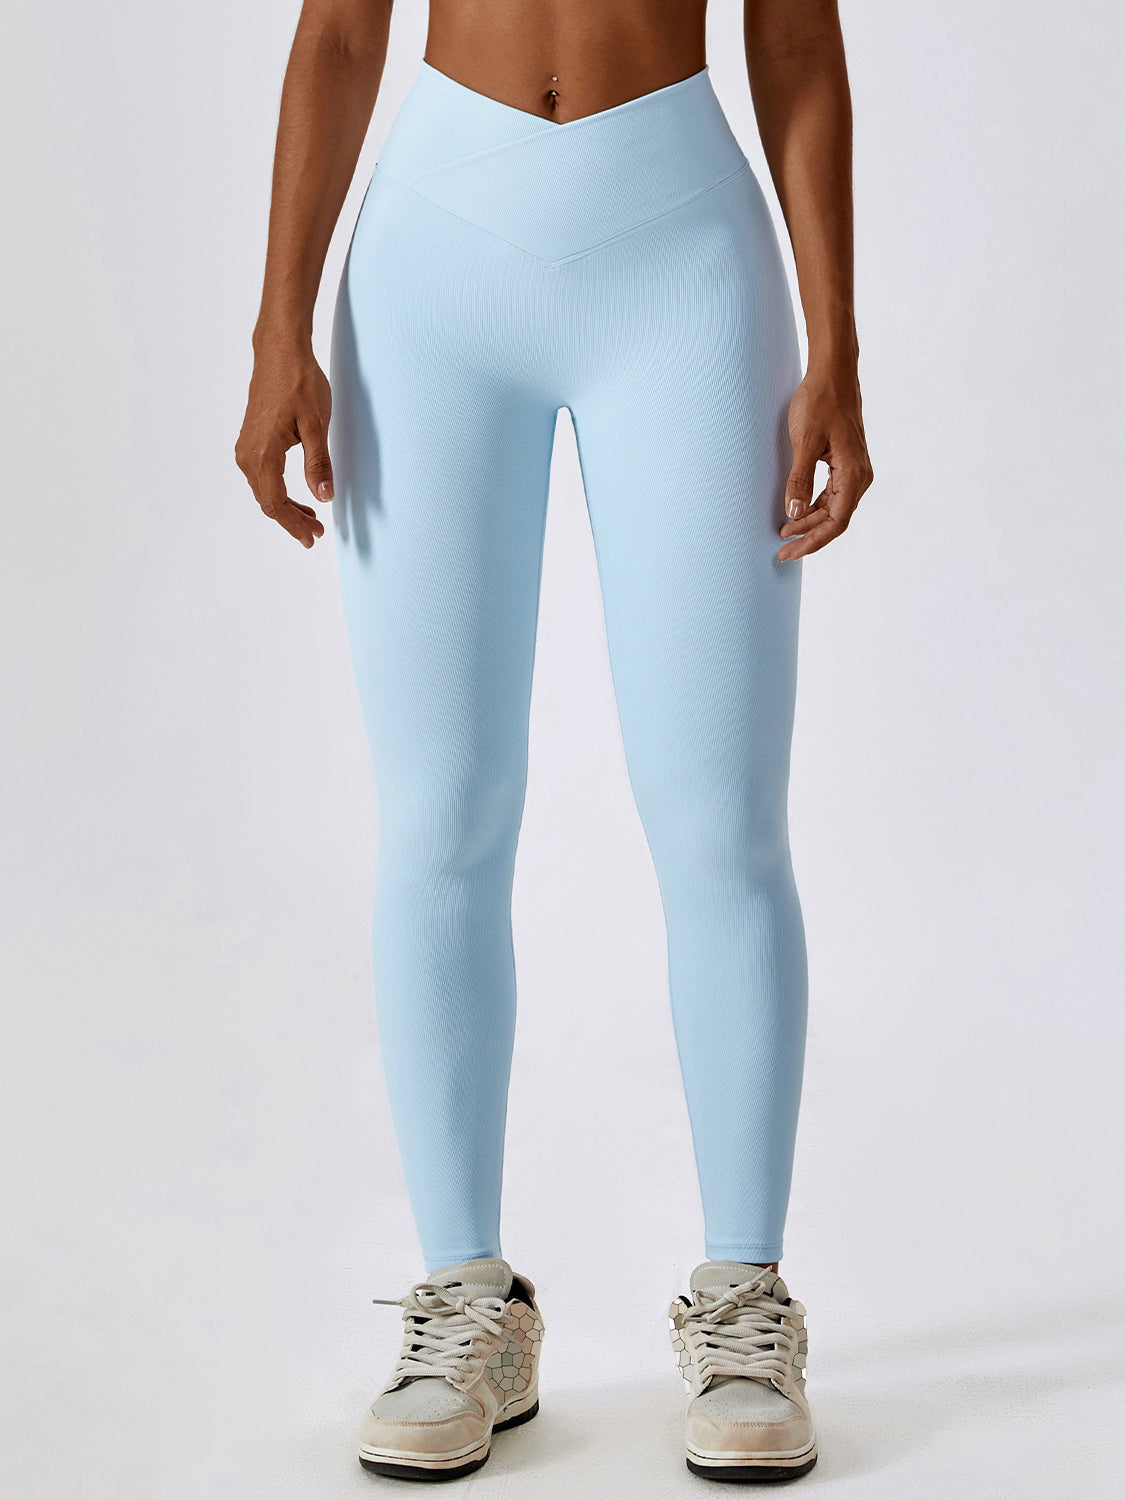 High-Waisted Nylon Leggings with Wide Band Pastel Blue